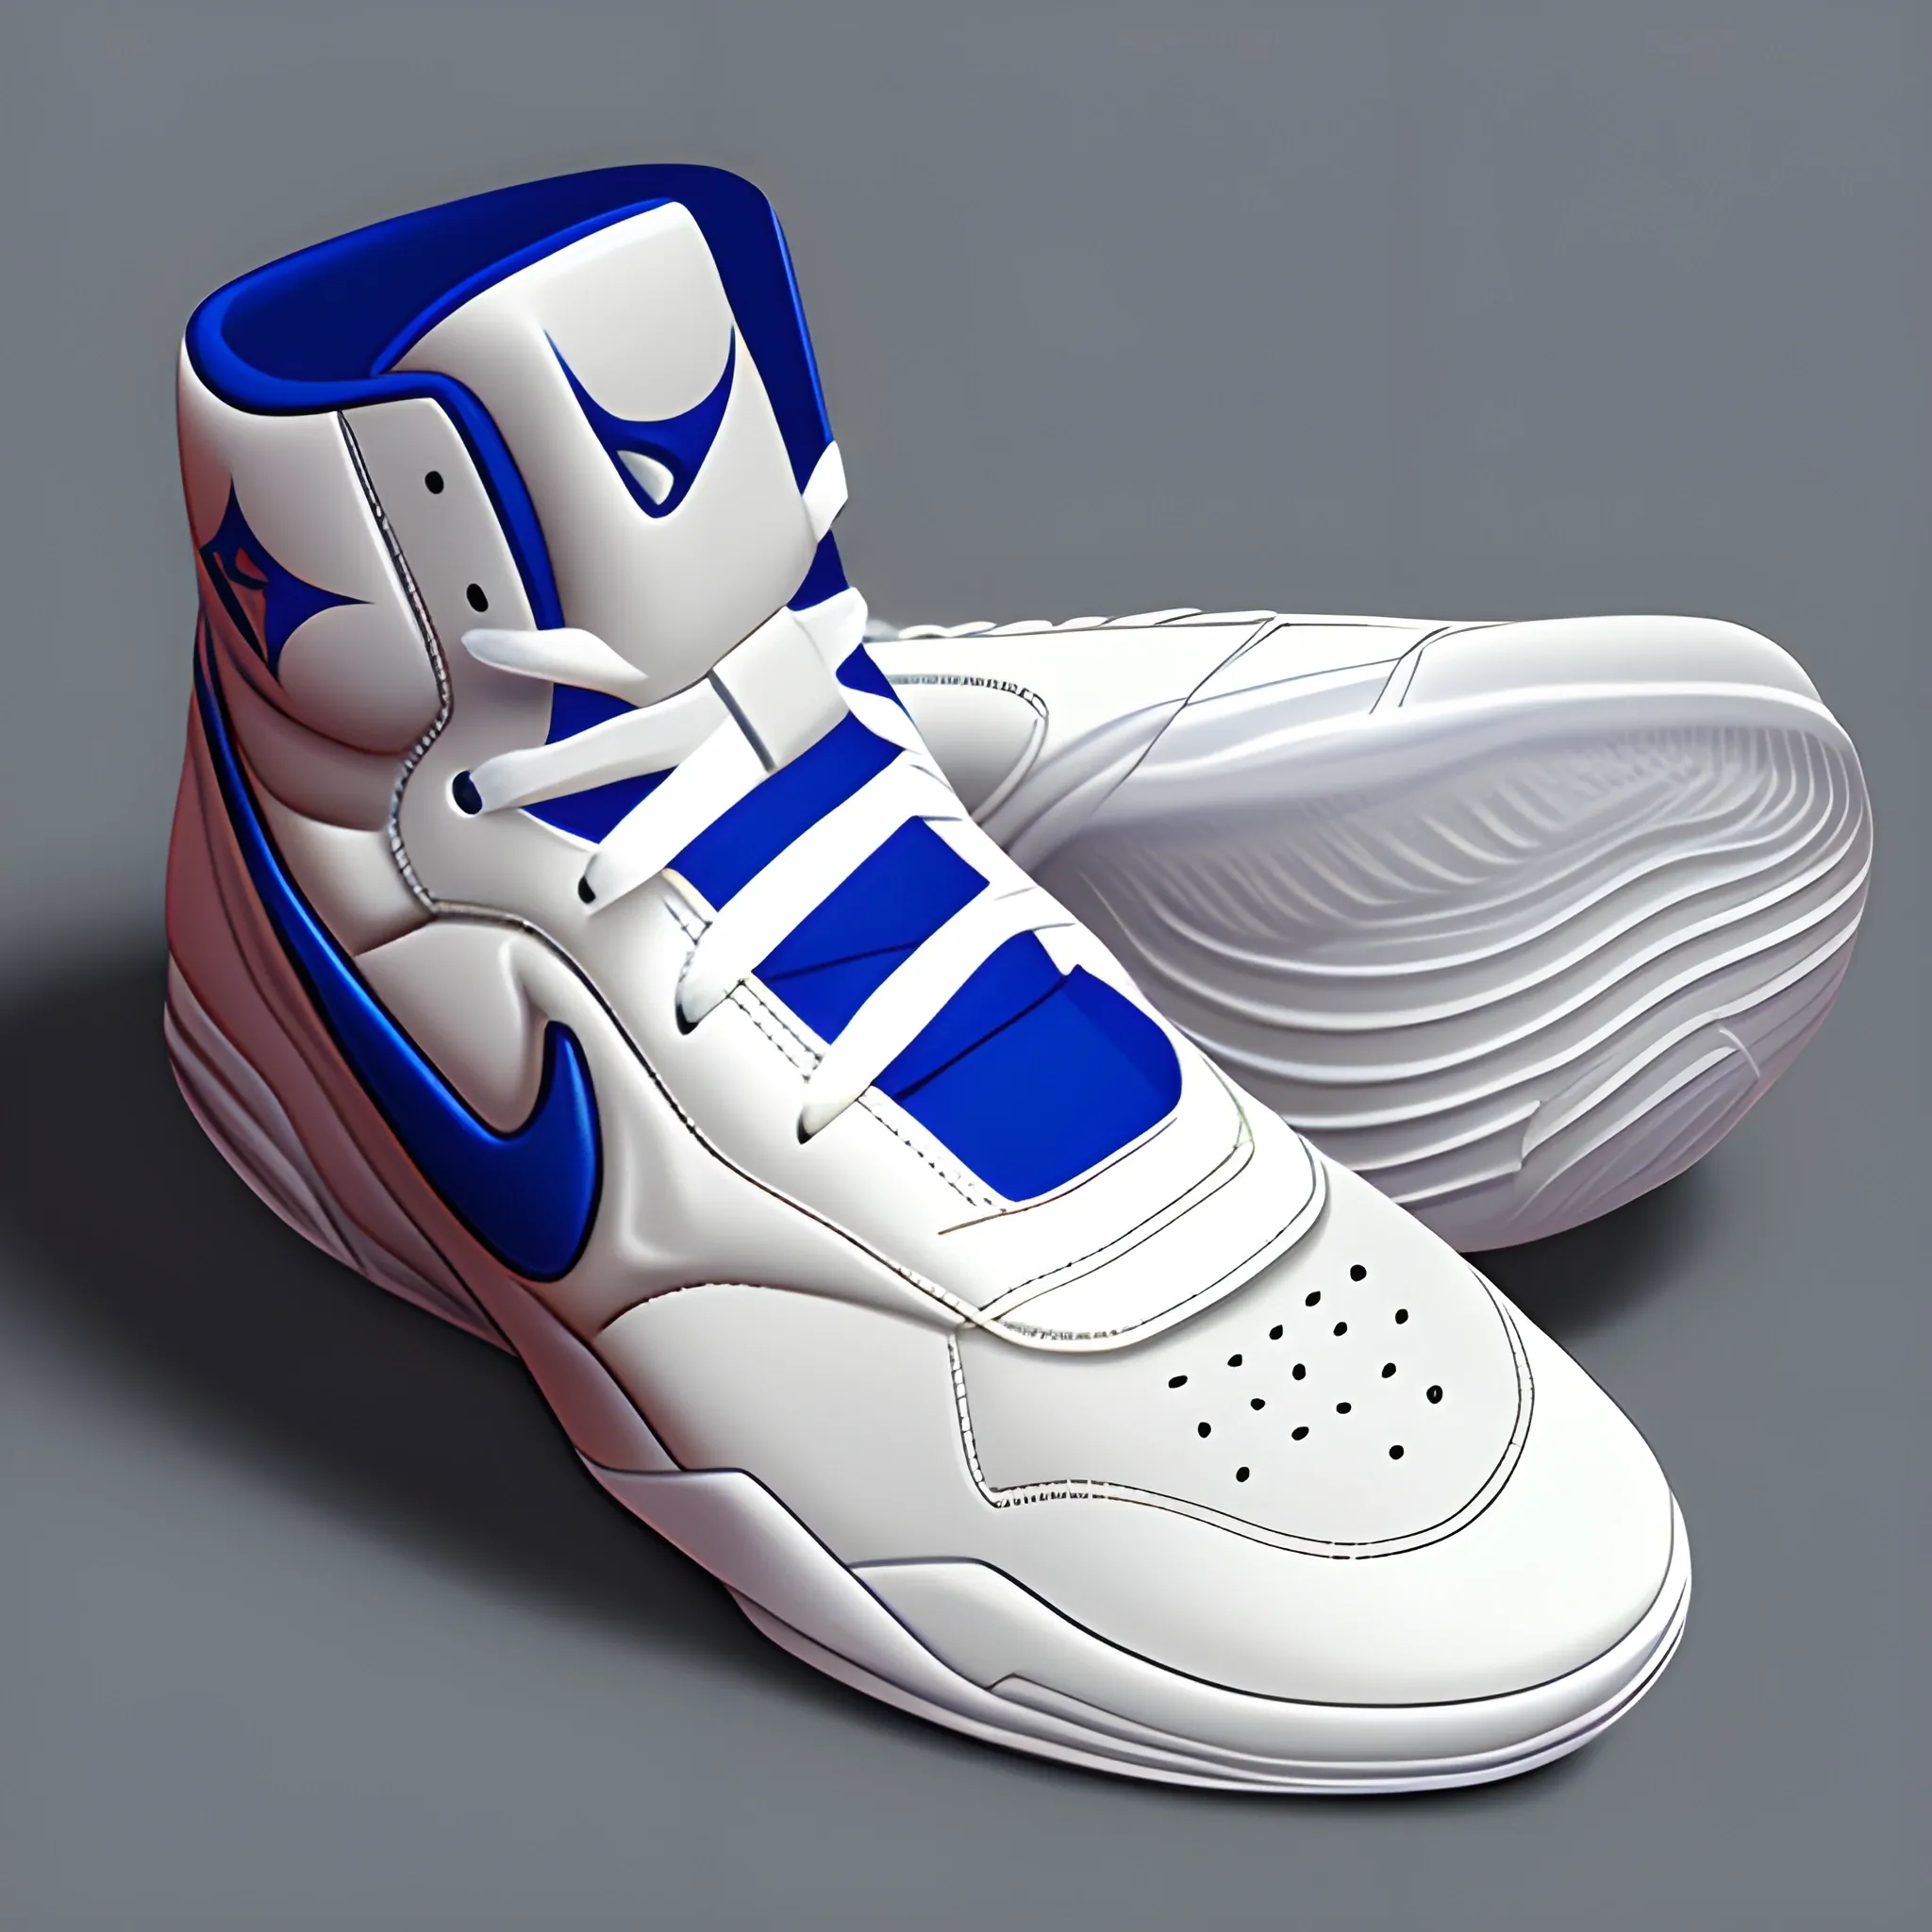 Concept Moon Knight basketball sneakers, popular in art station, soft feel, bloated, don't nike elements, smooth, sharp focus
